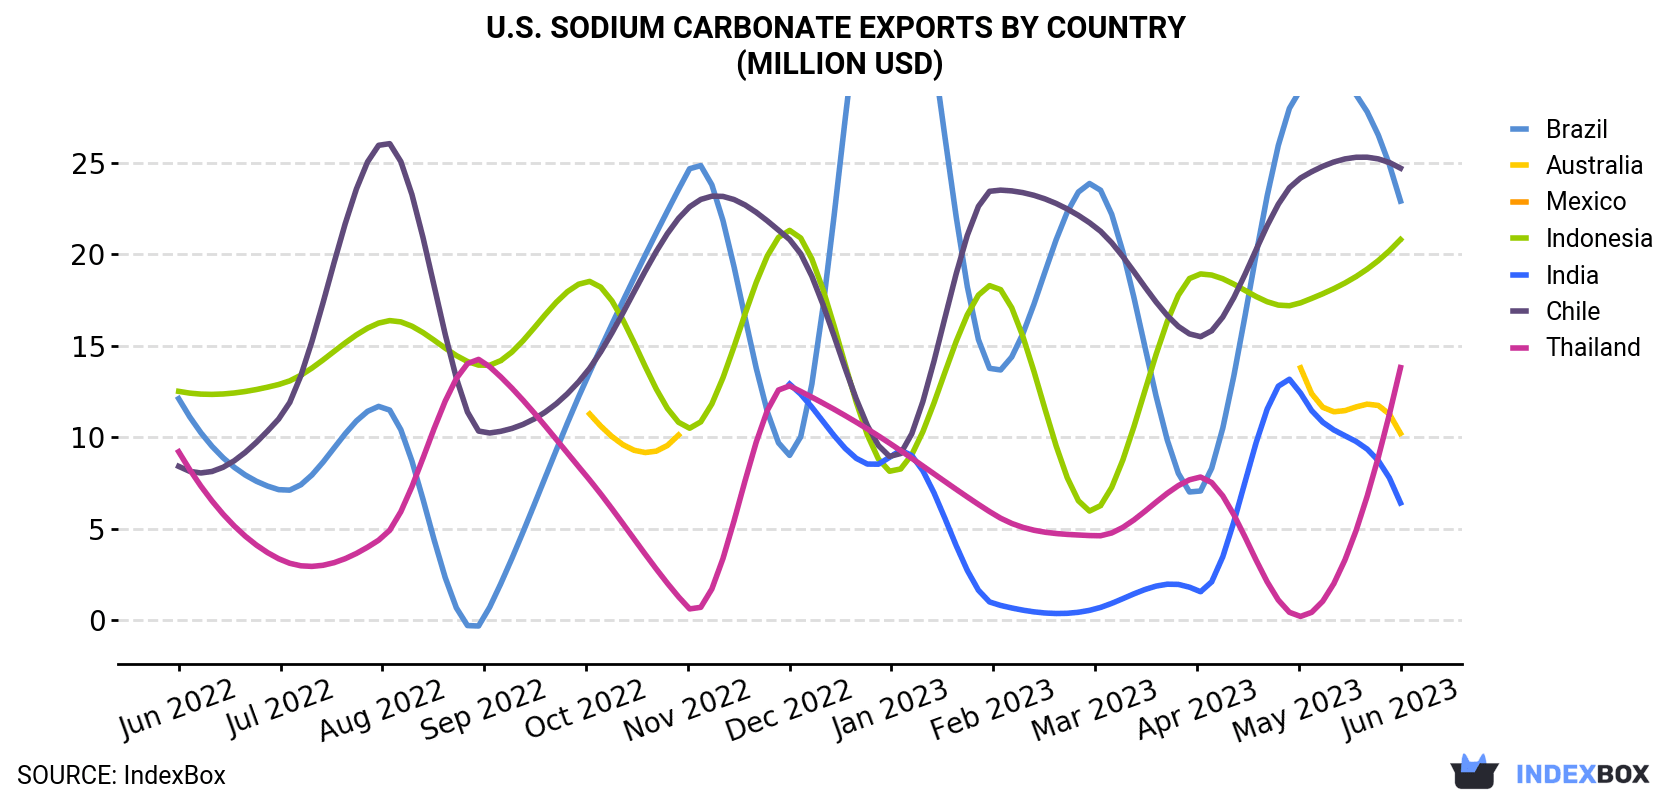 U.S. Sodium Carbonate Exports By Country (Million USD)